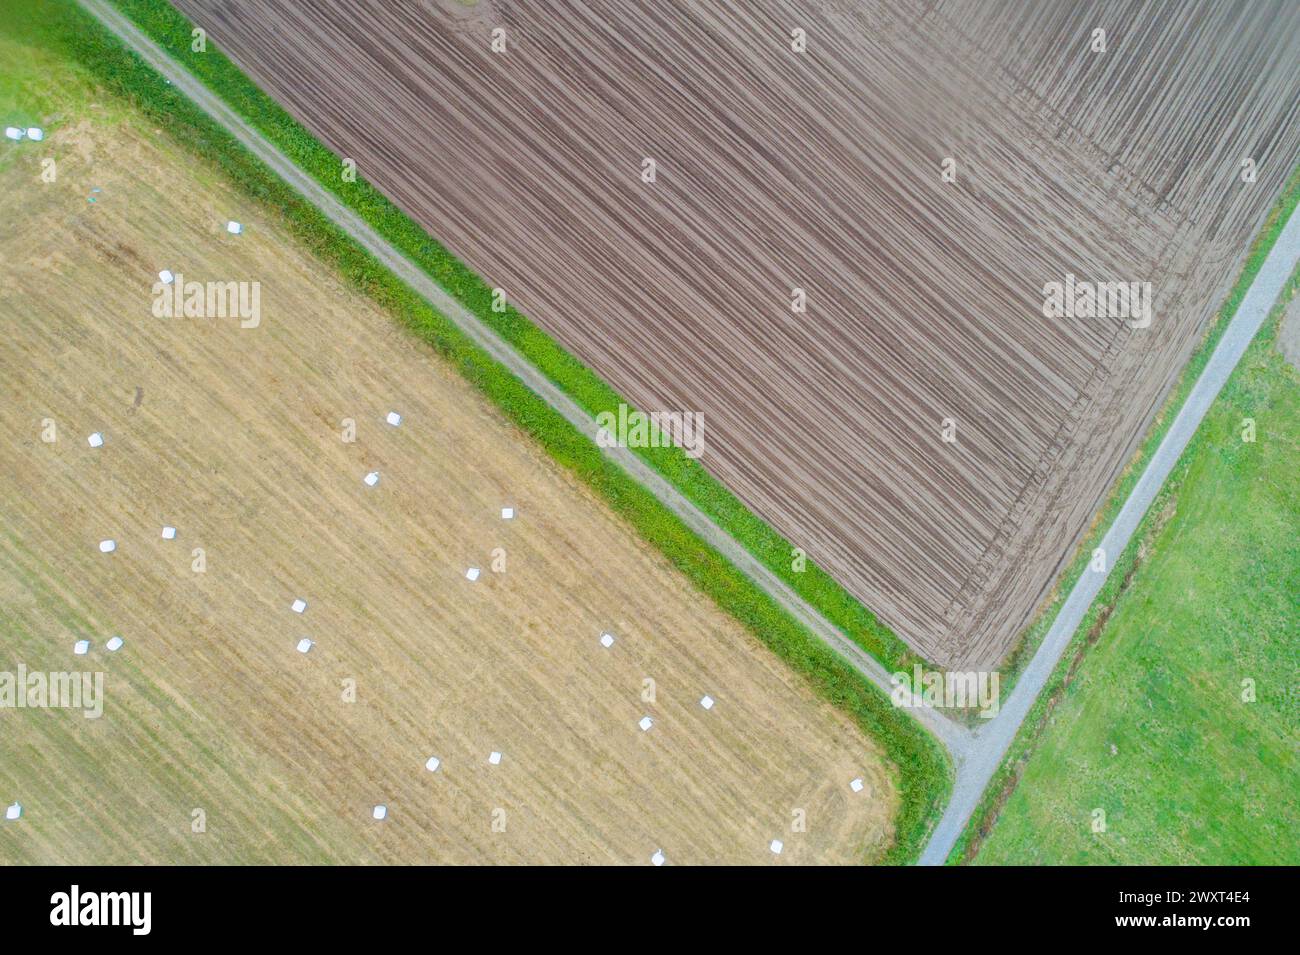 aerial top view of agricultural fields, one field plowed for planting and another harvested with round straw bales Stock Photo